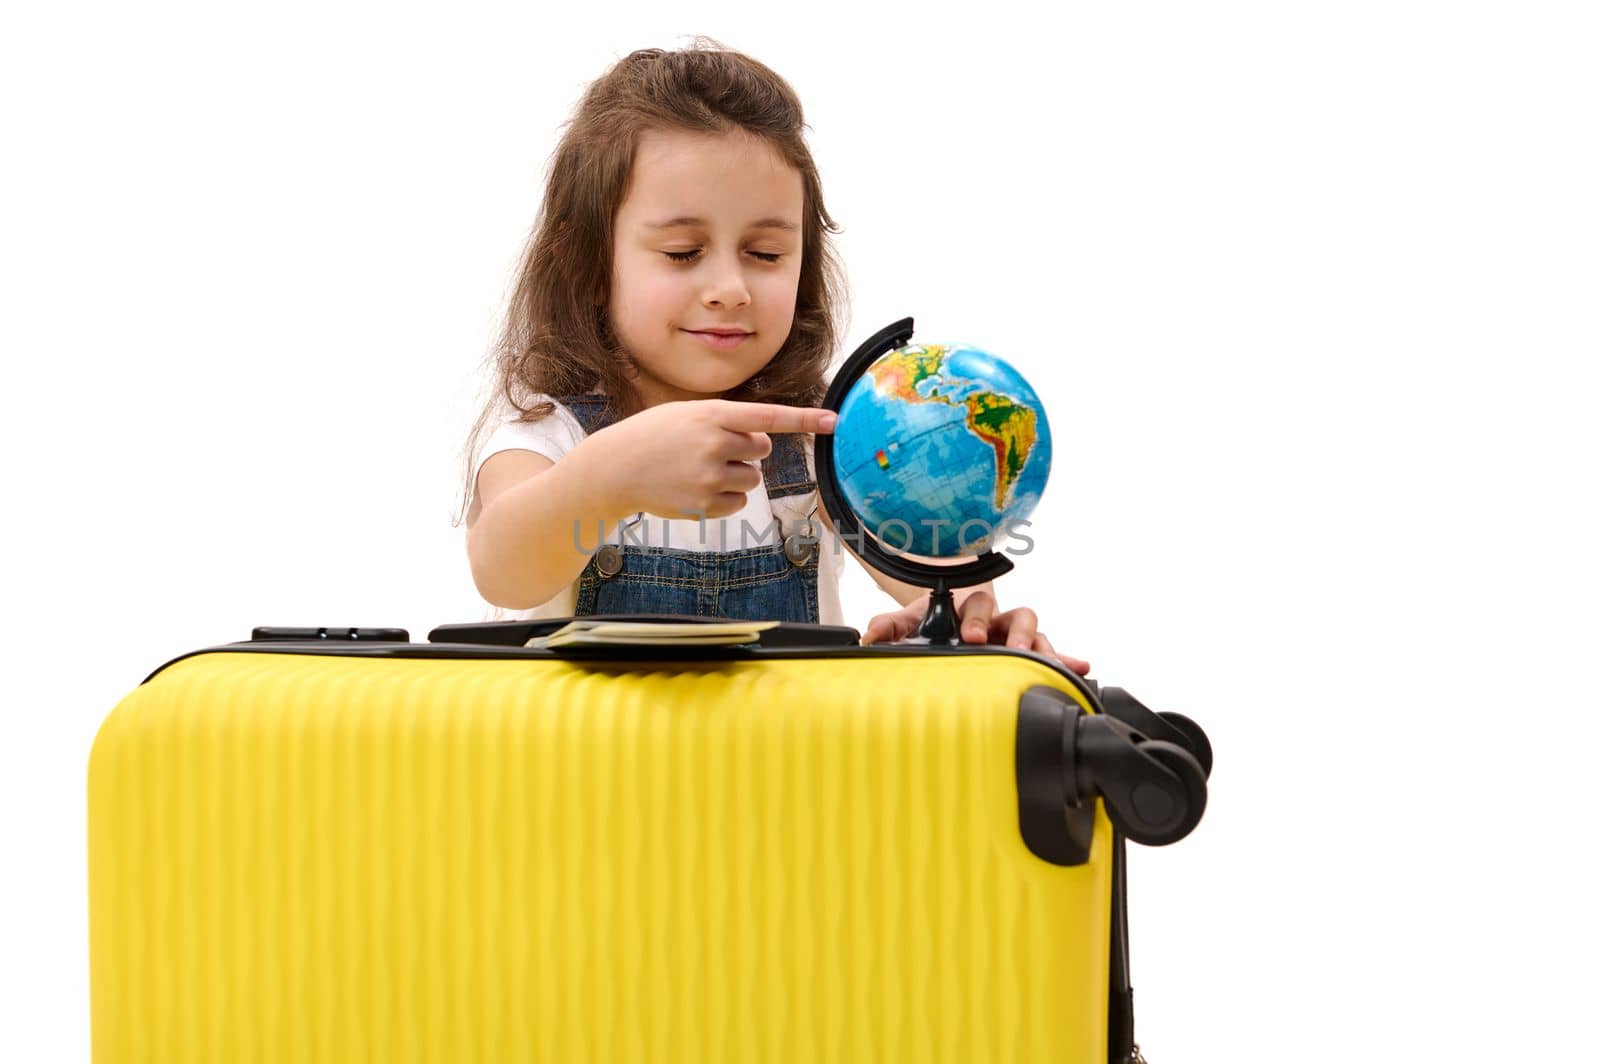 Happy European kid girl 5-6 years old with suitcase, pointing with her finger at the globe, isolated on white background by artgf